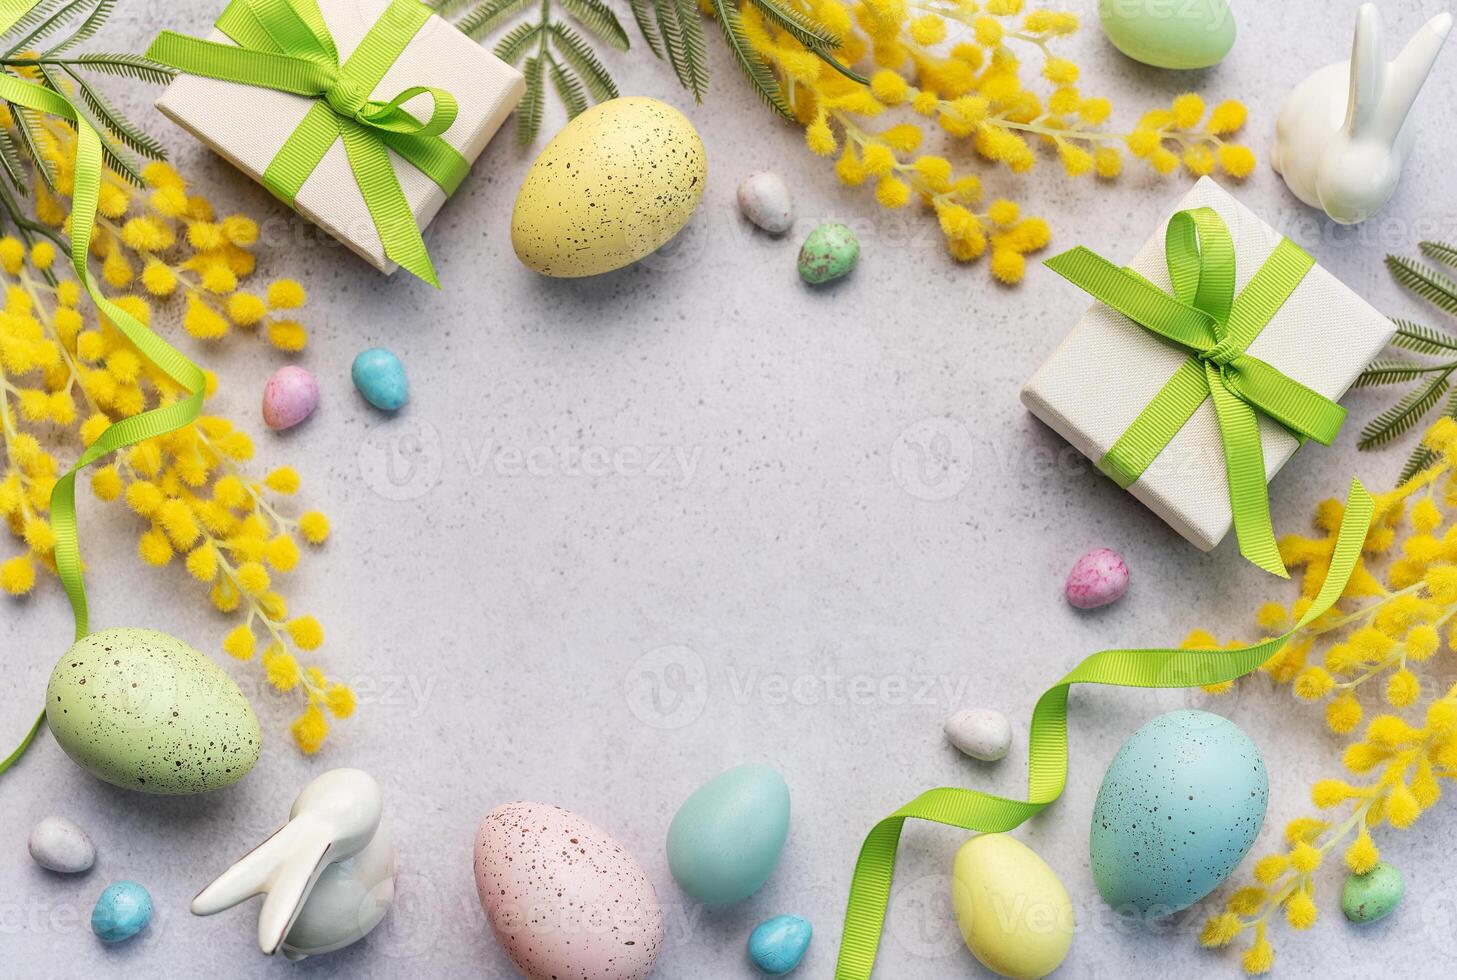 Festive Easter Celebration With Decorated Eggs and Gifts on a Light Background photo